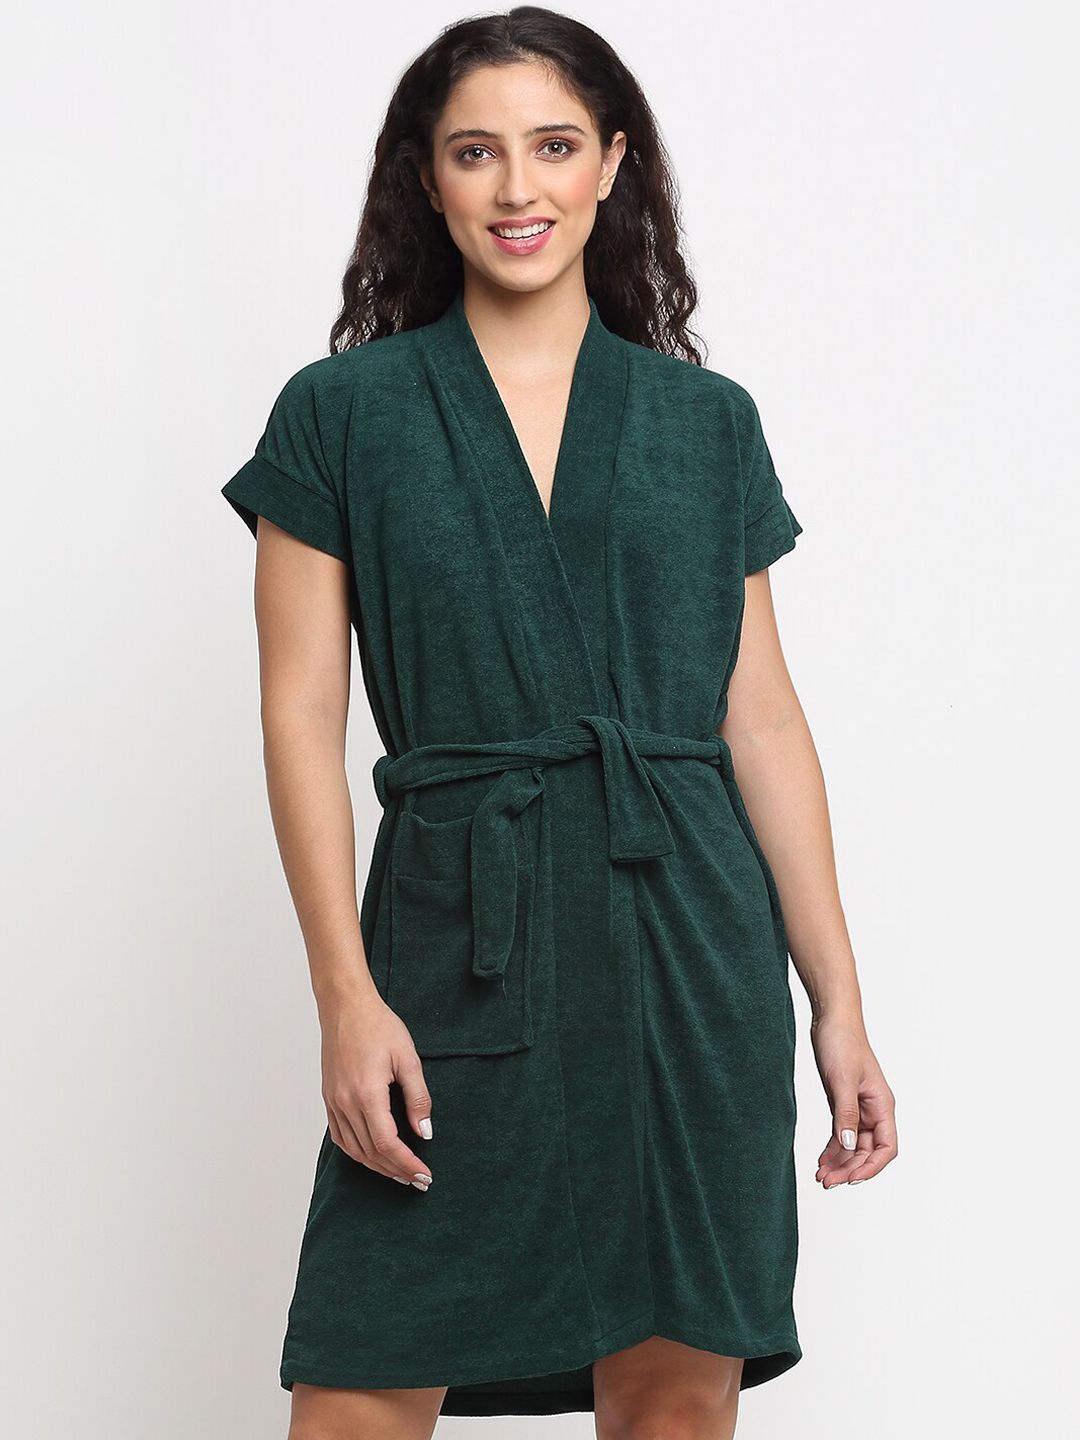 LacyLook Women Green Solid Bath Robe Price in India